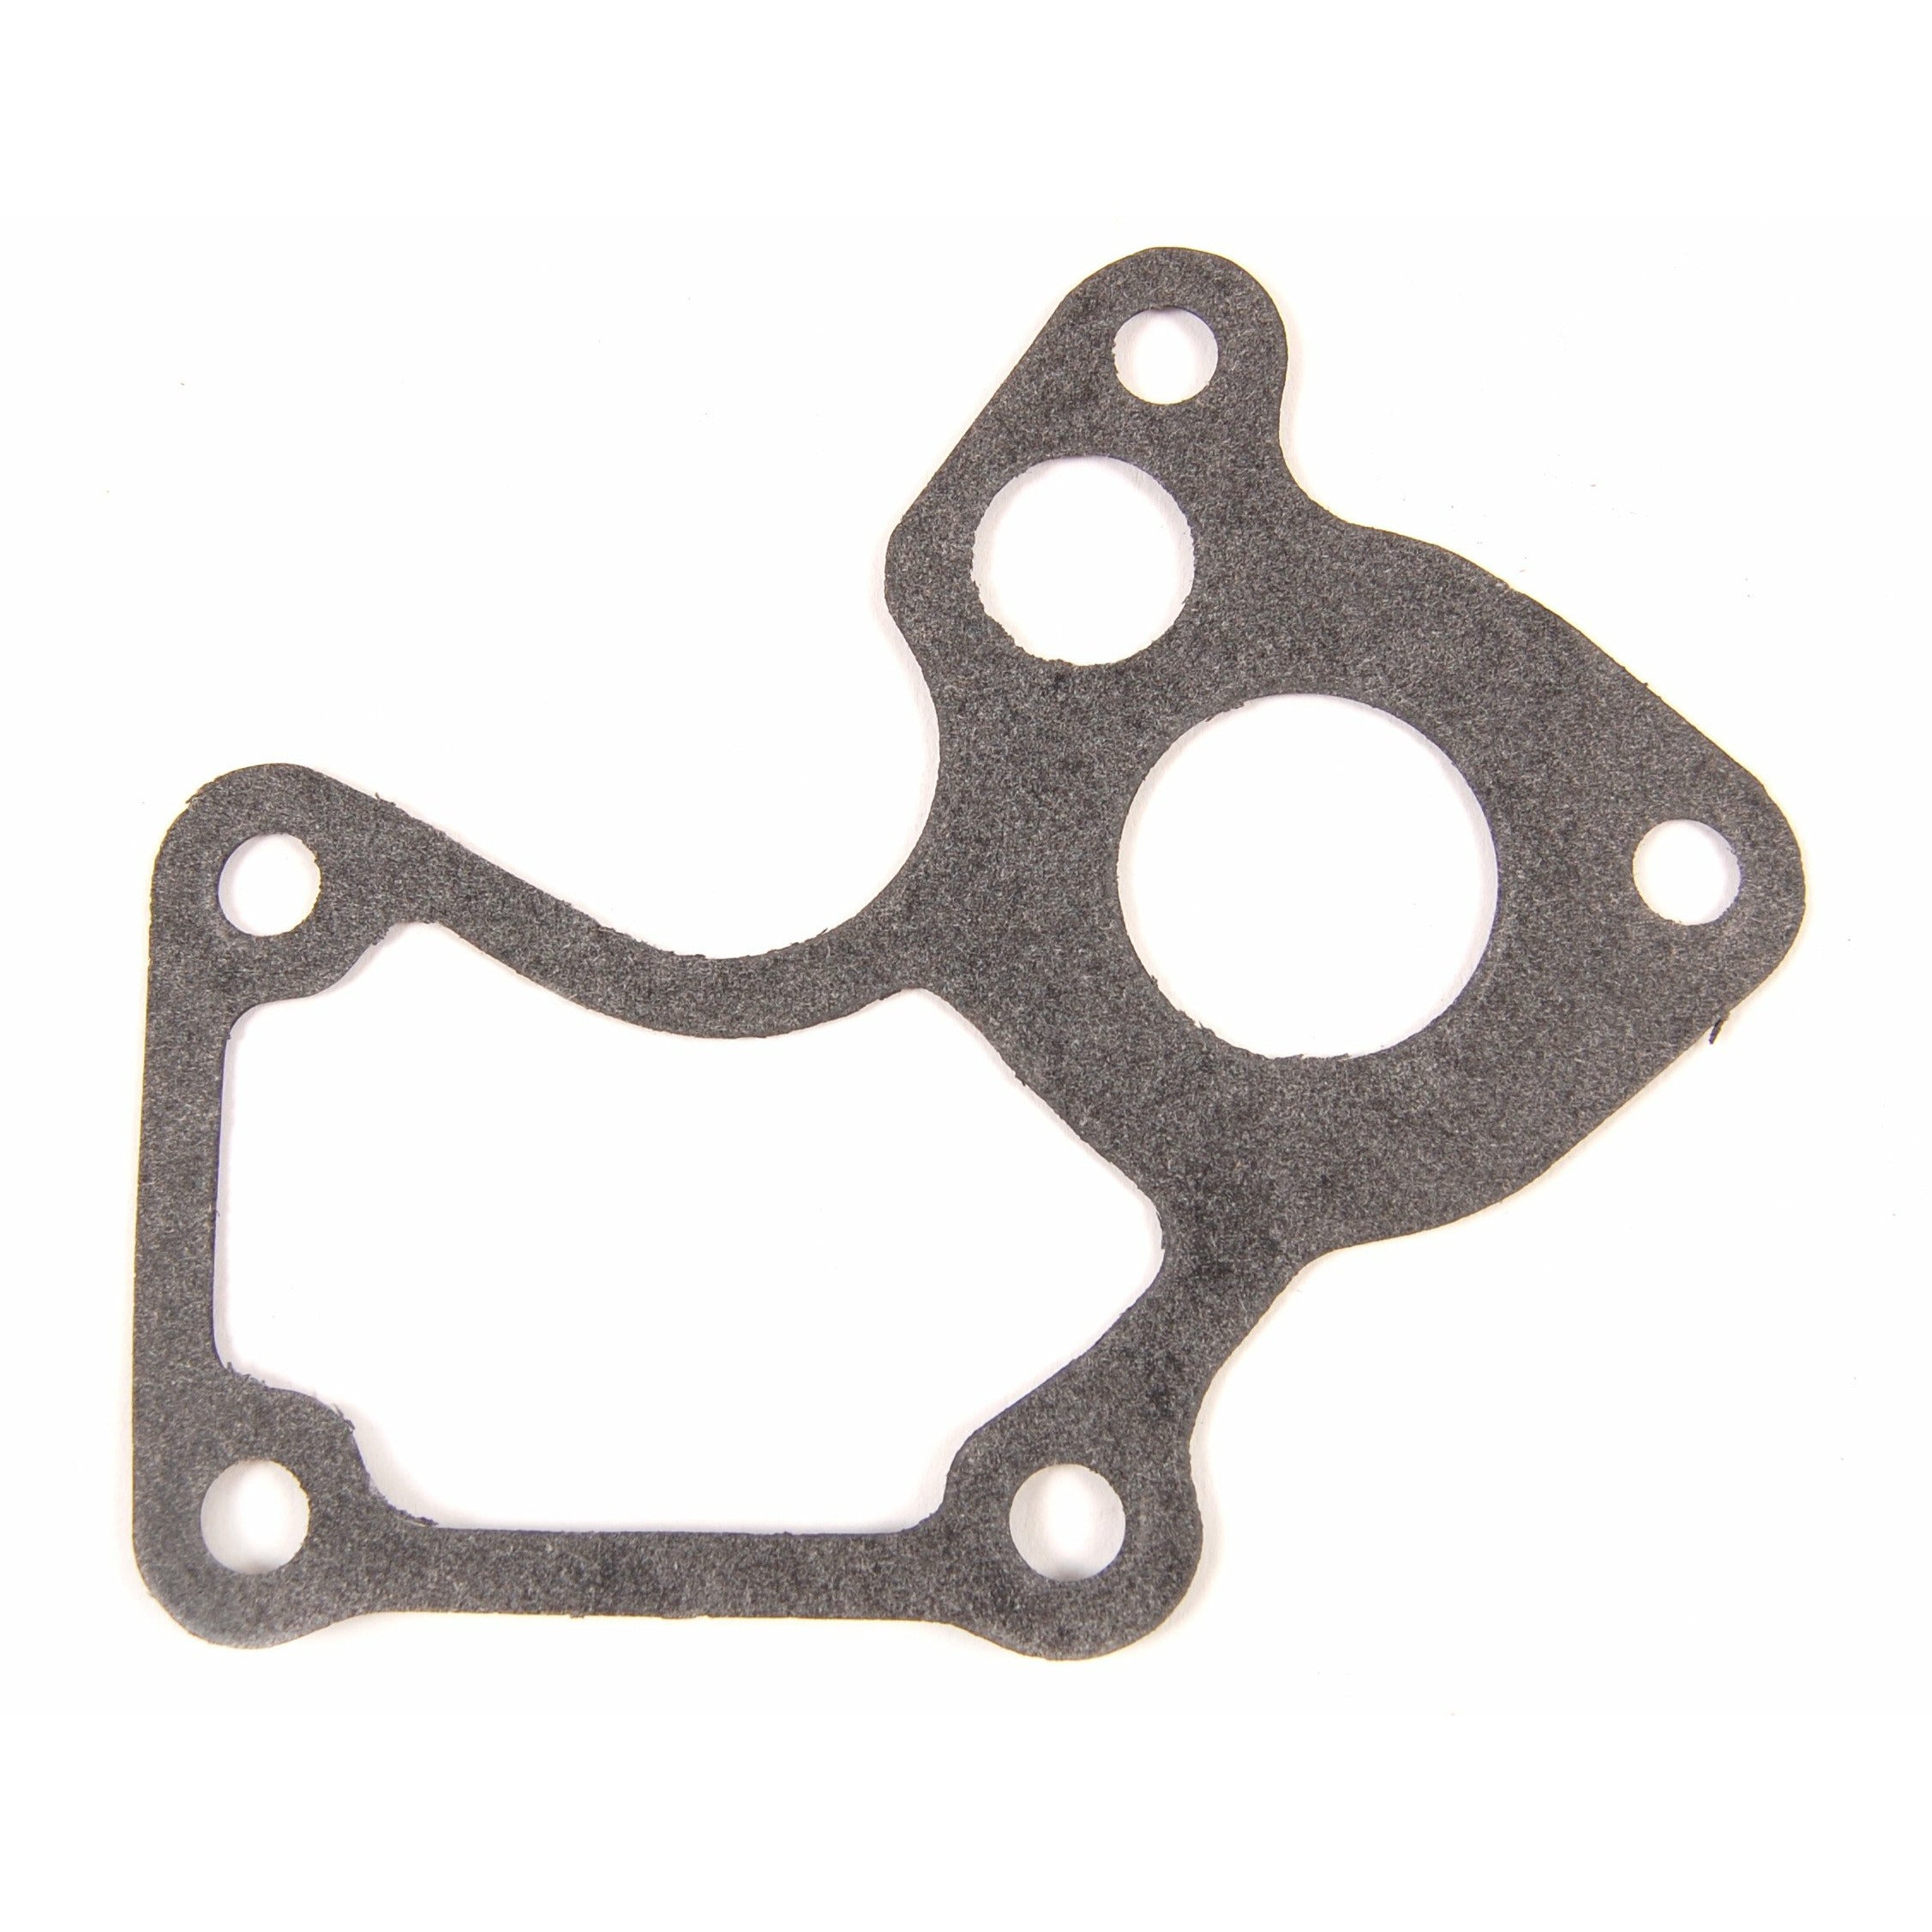 Evinrude Thermostat Cover Gasket 0332108